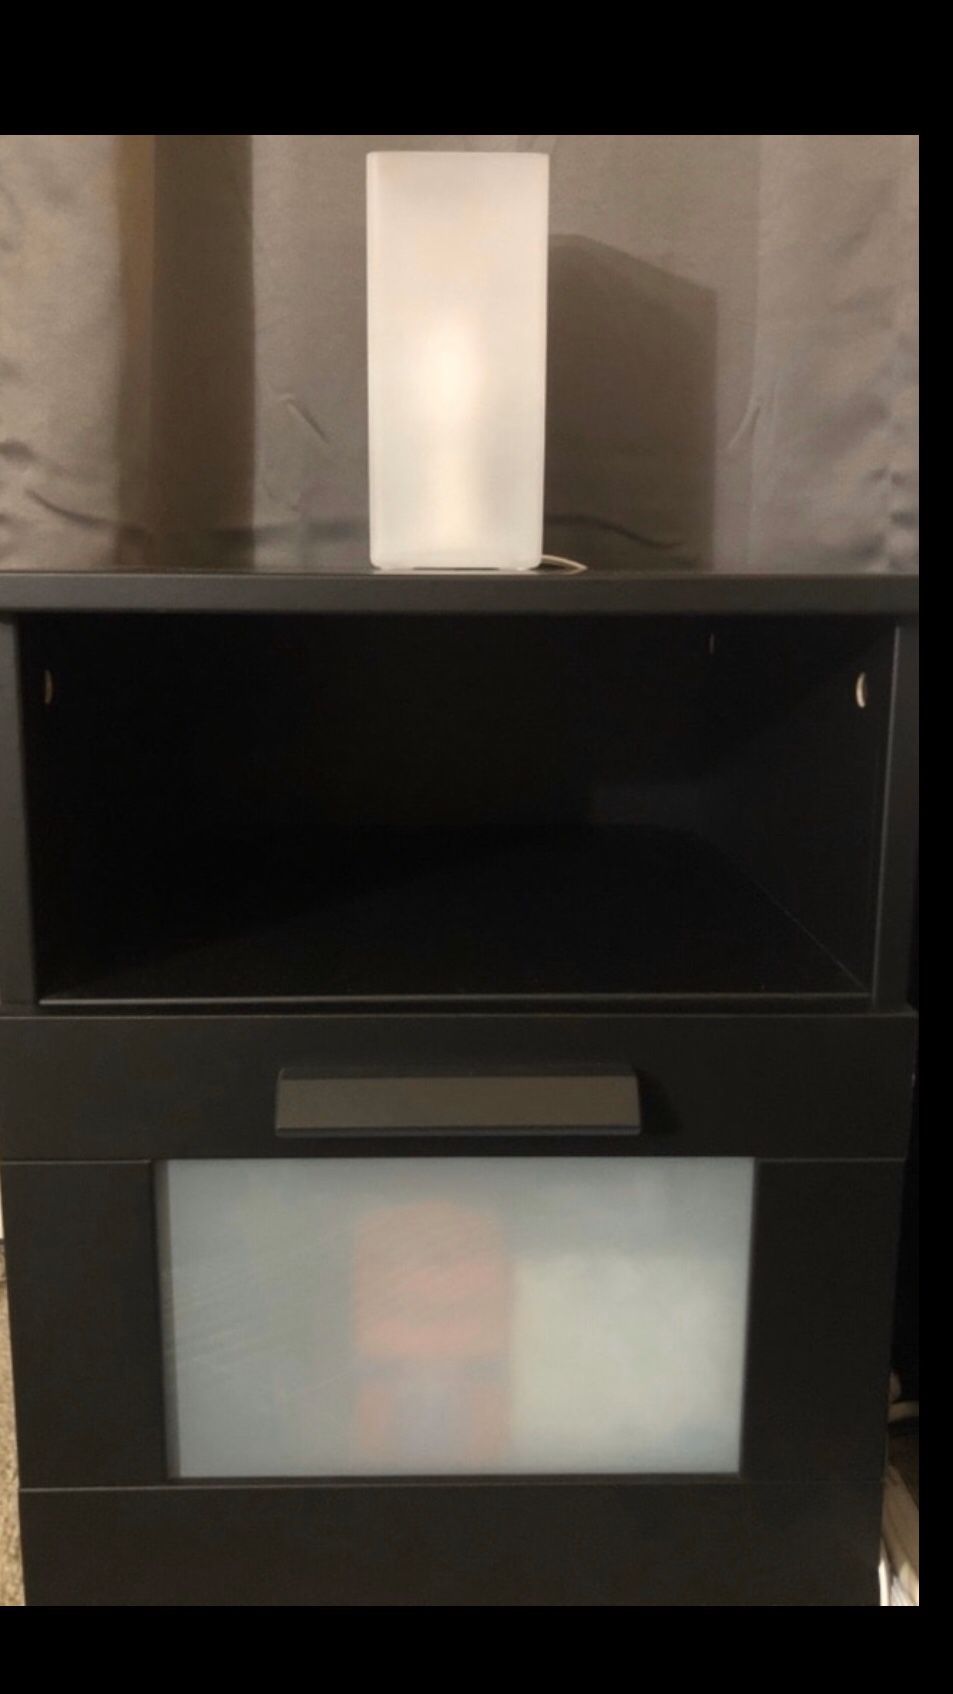 IKEA Nightstands And Table Lamps (See Description for pricing)